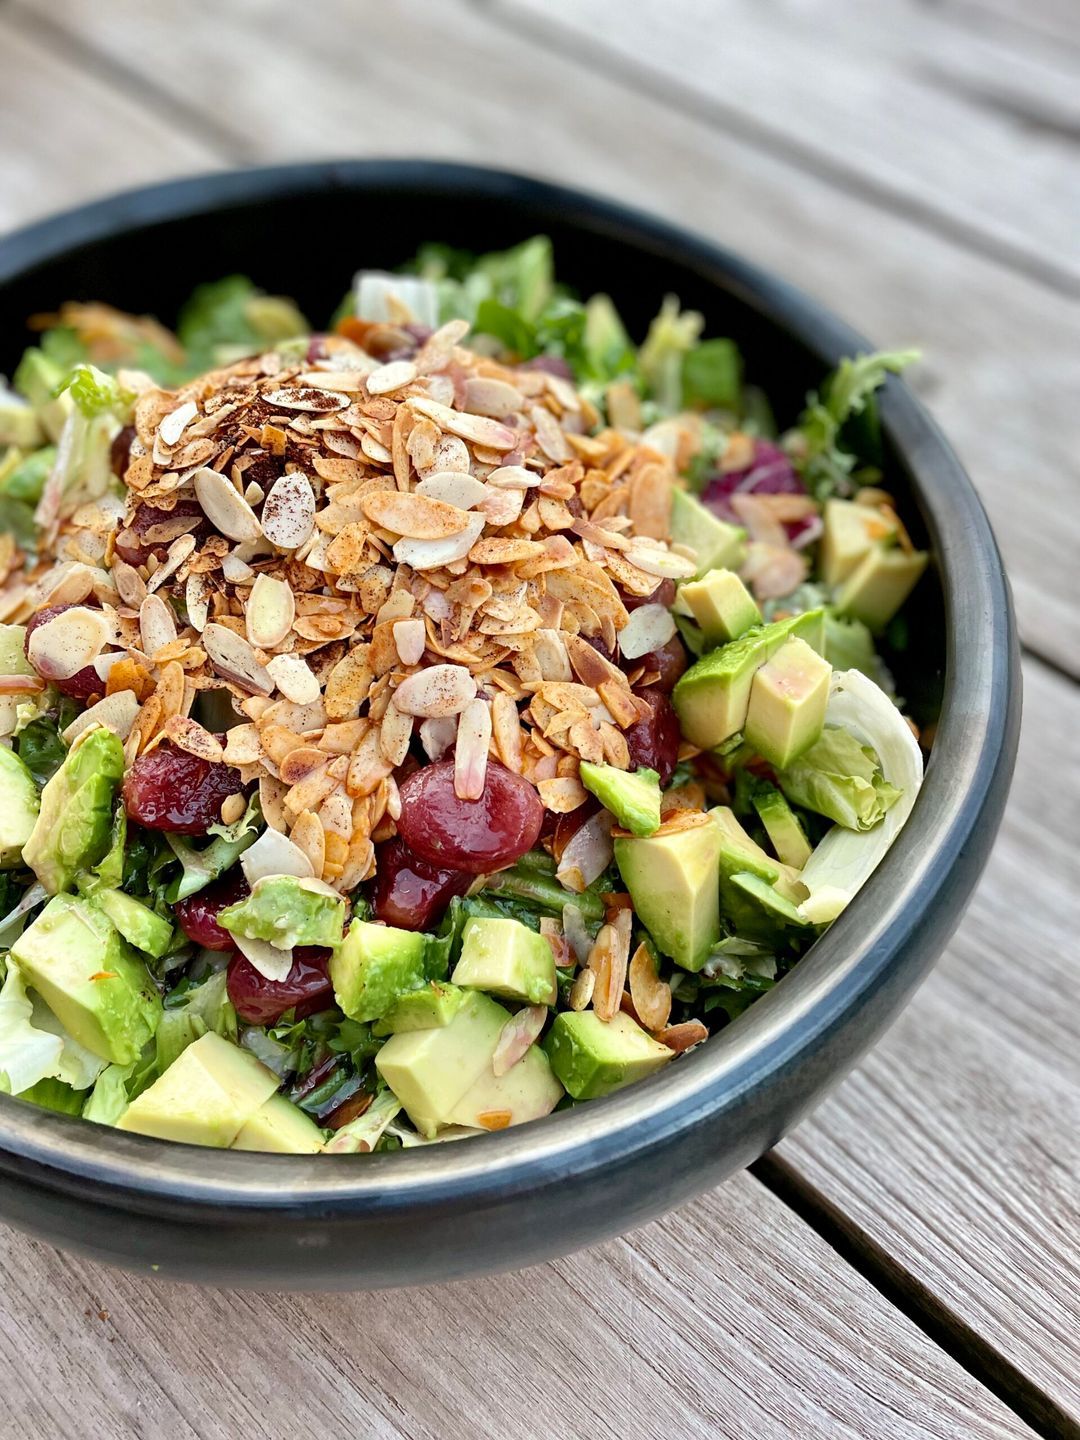 Salad with roasted grapes, avocado and almonds